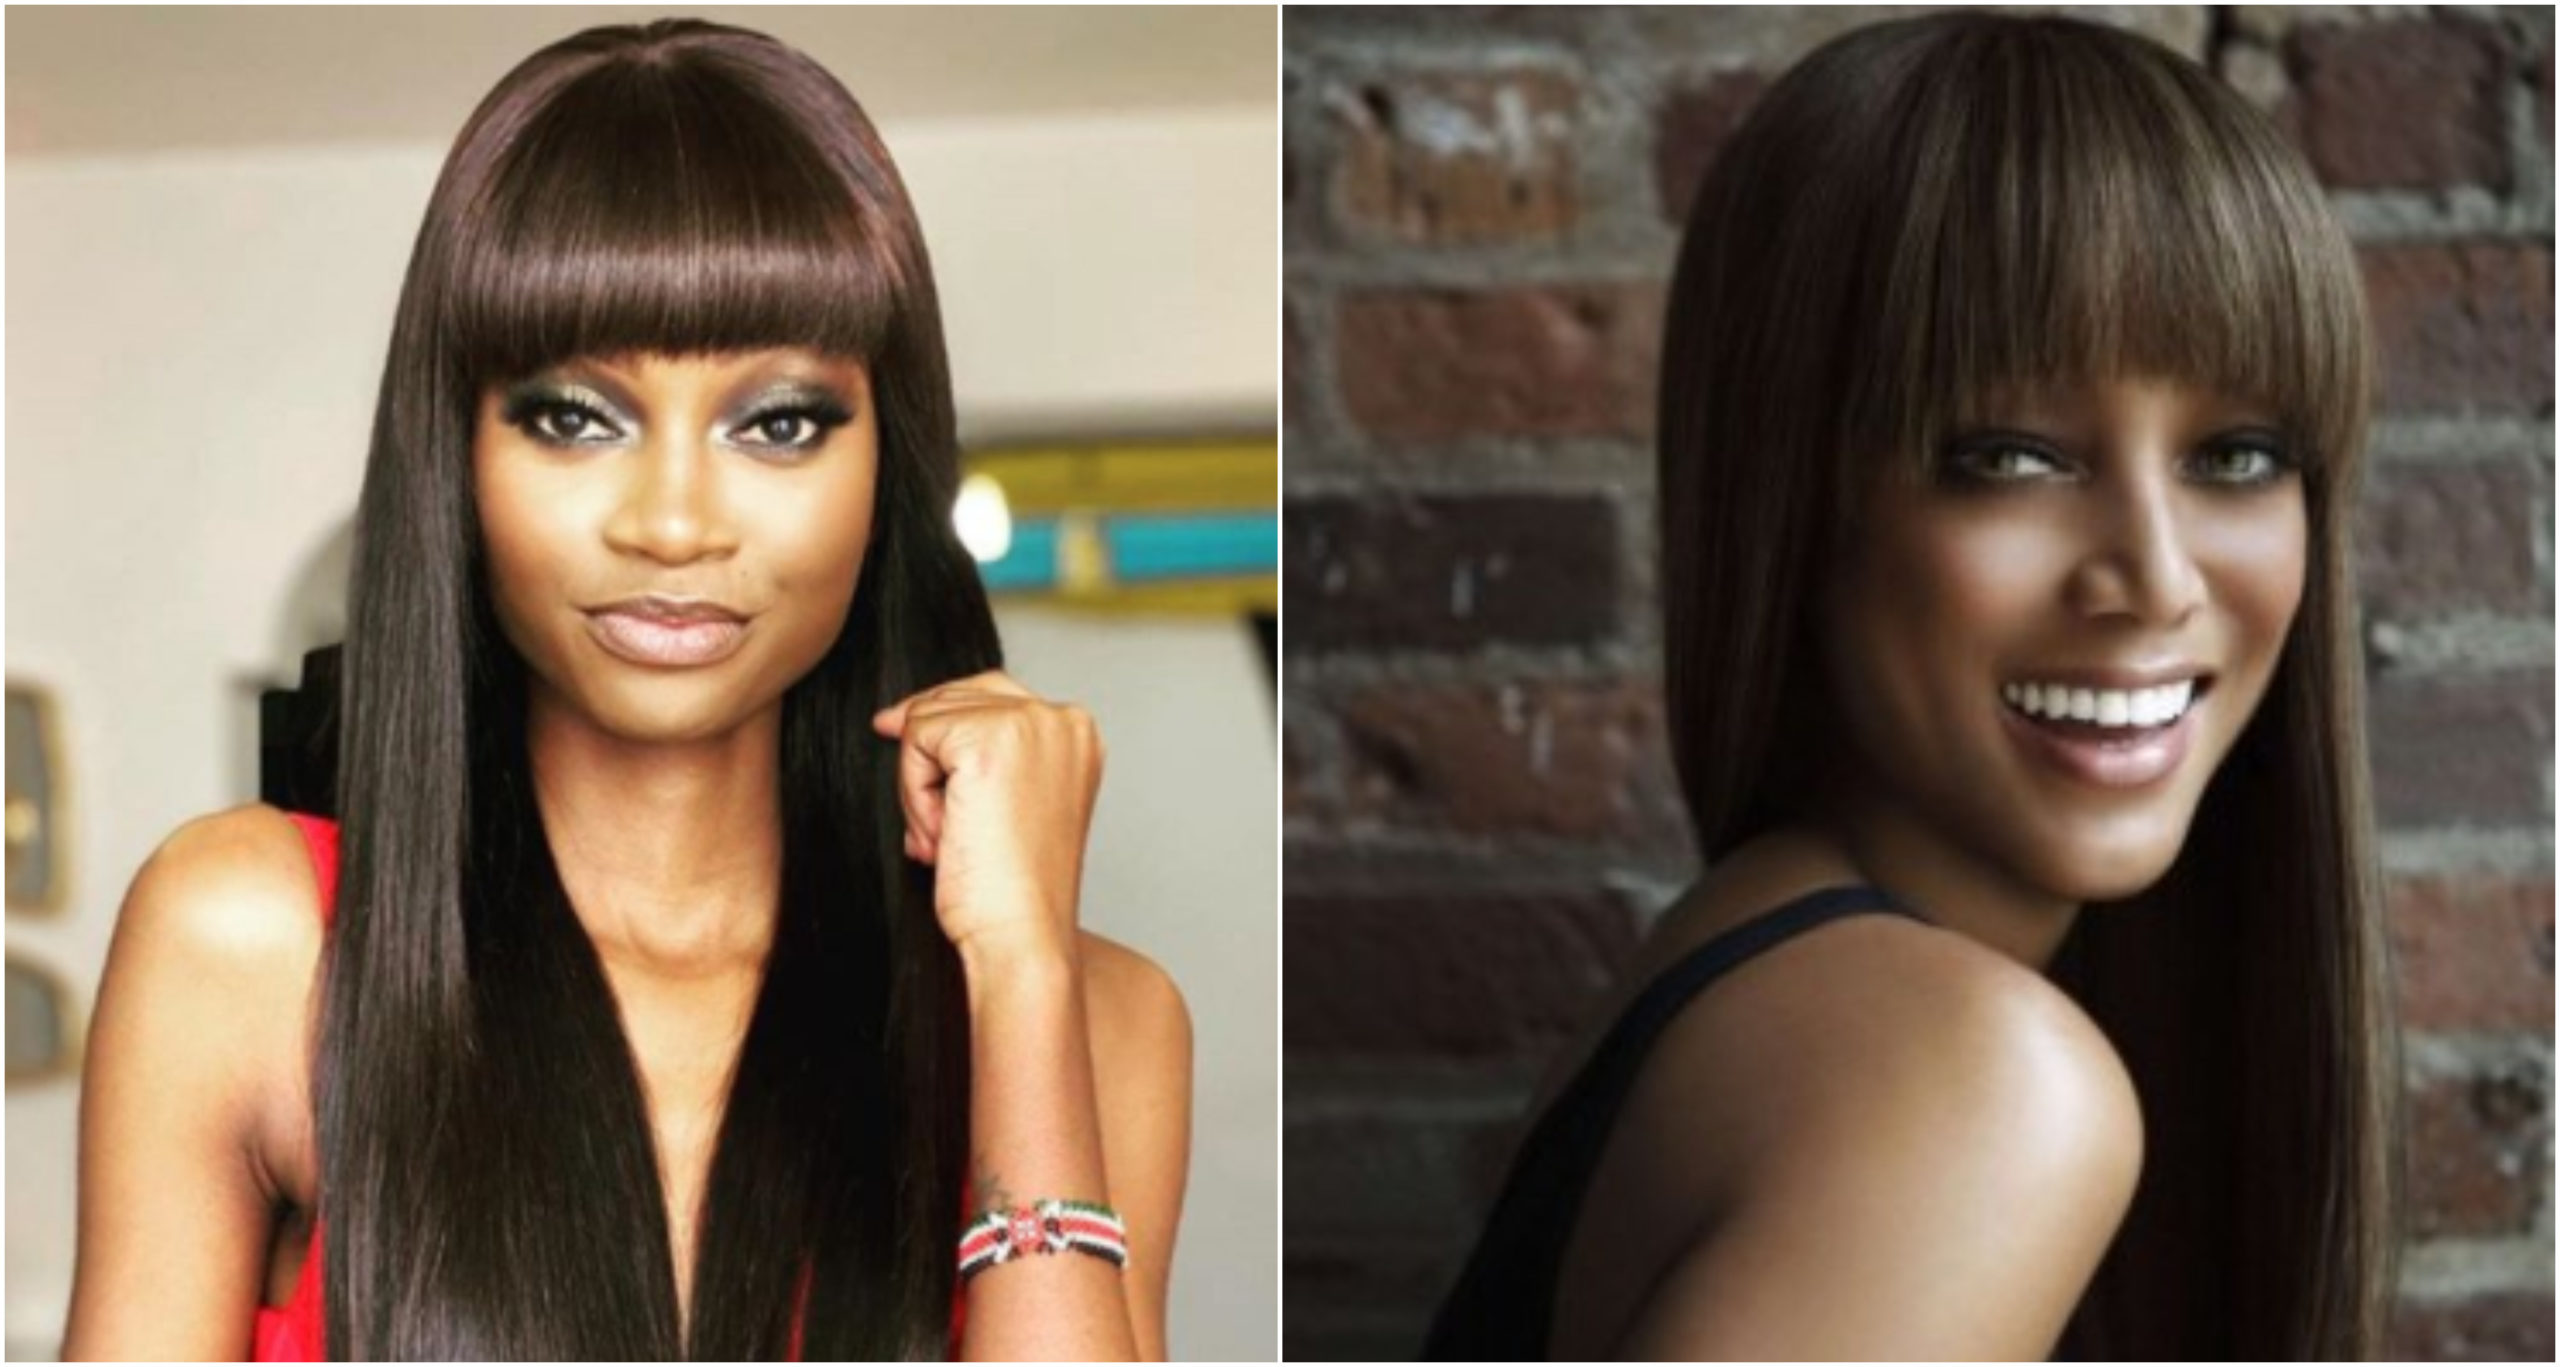 Kenyan radio host draws Tyra Bank’s attention after showcasing their close resemblance